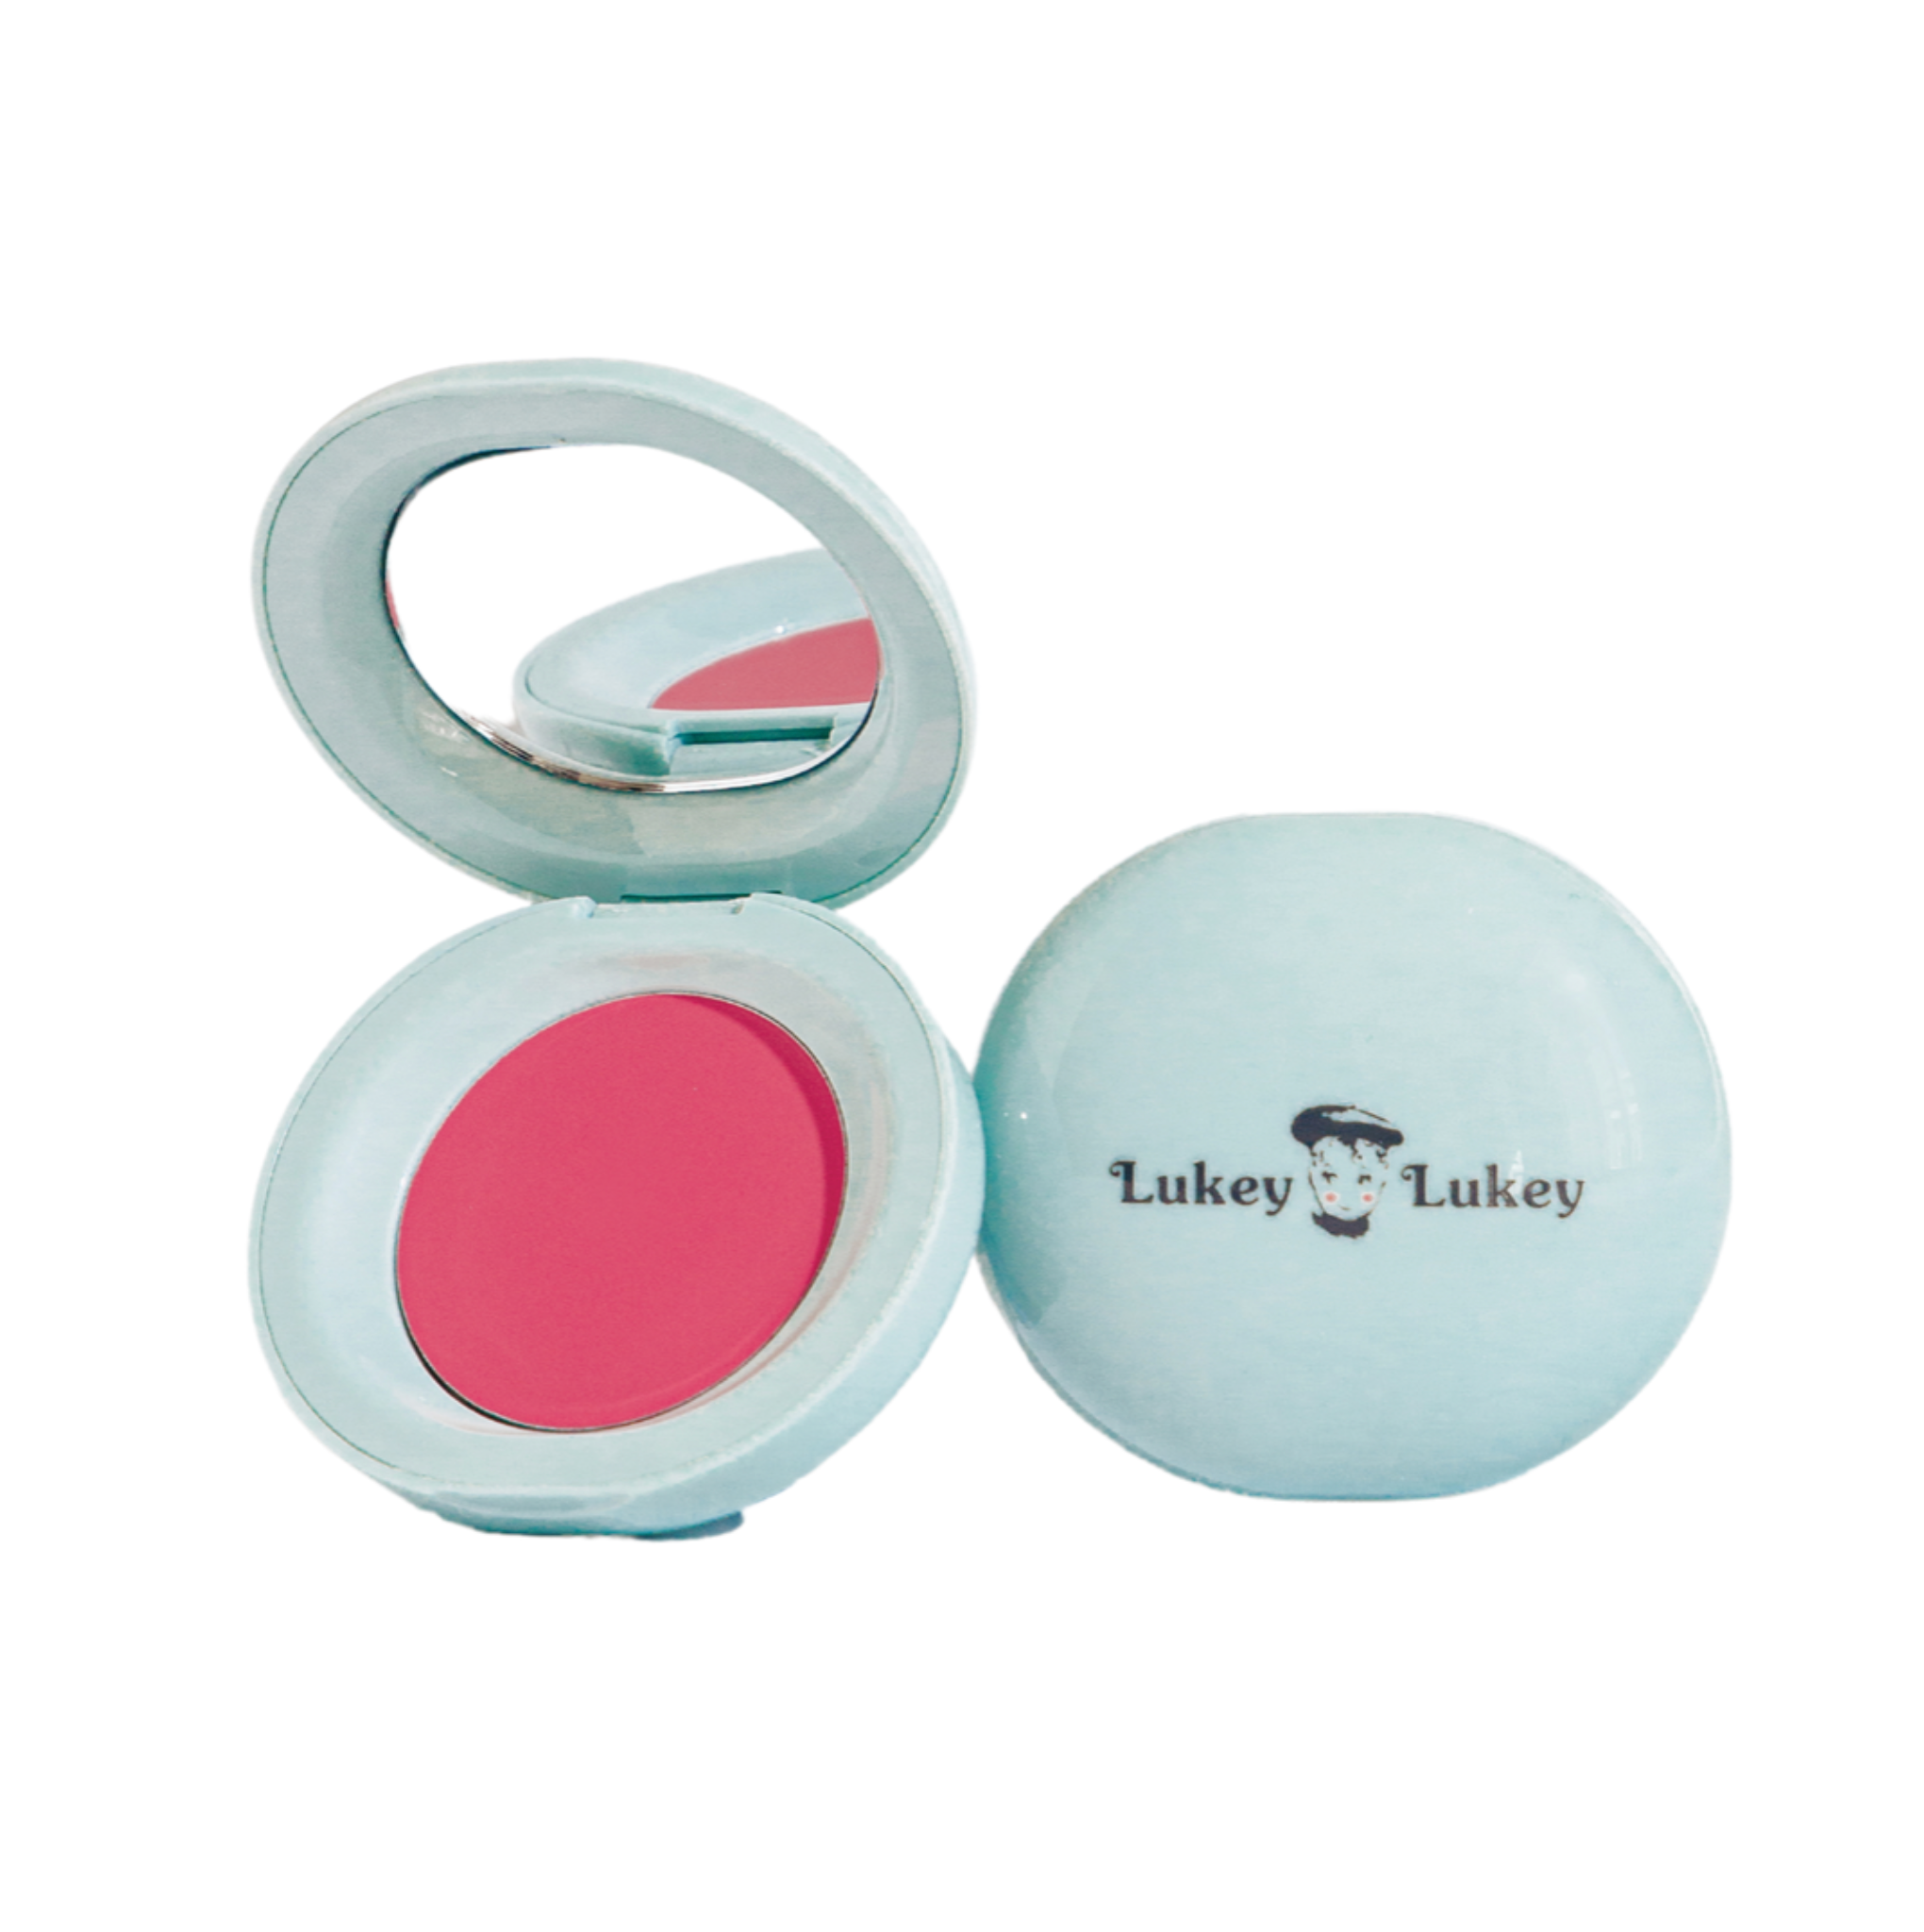 Lukey Lukey Crème Blush, open and closed